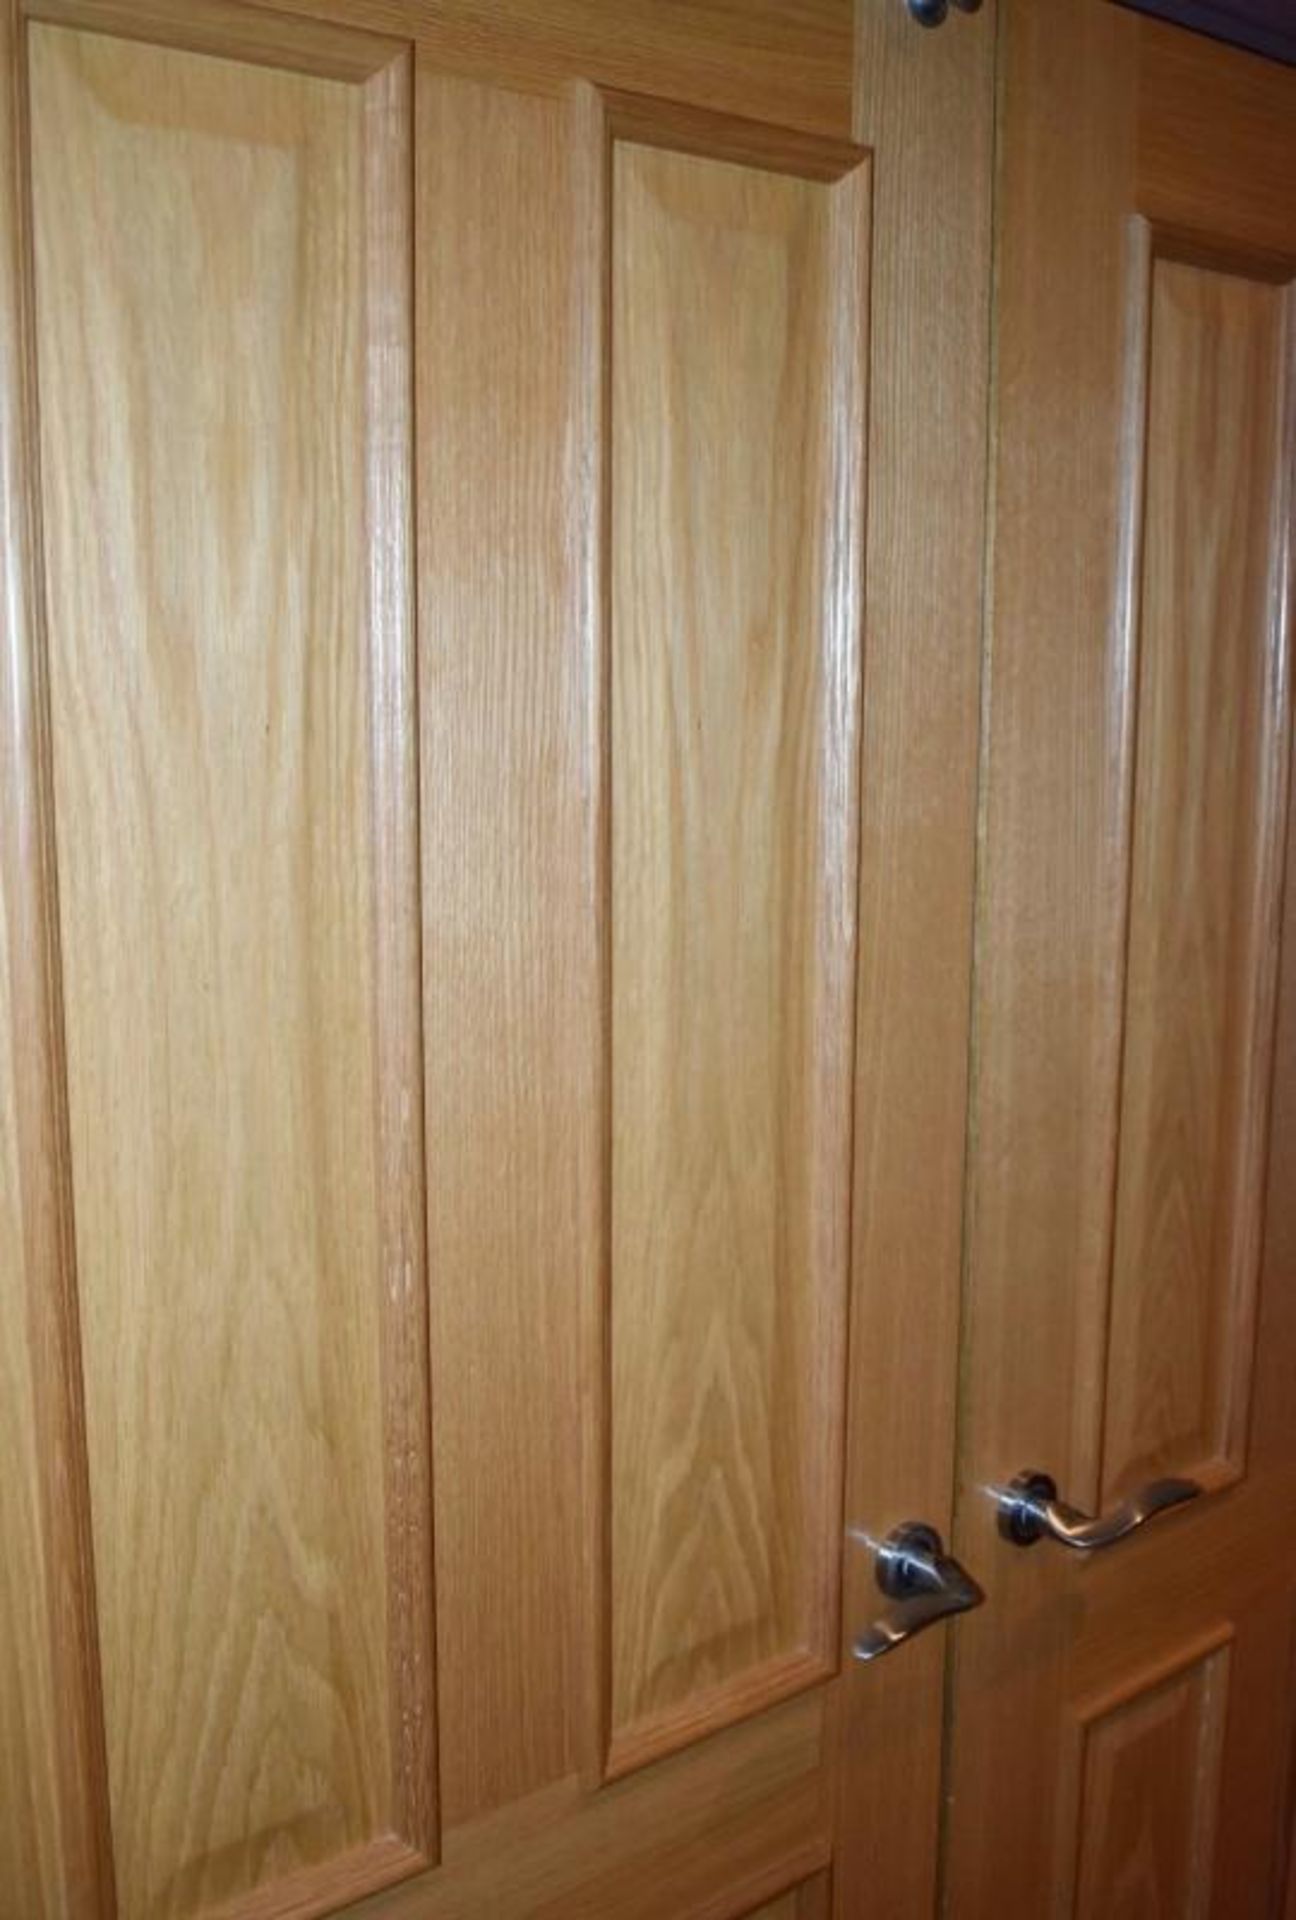 A Pair Of High Quality Internal Wooden Doors - Dimensions Of Each: H200 x W75 x 7cm - Ref: ABR016 / - Image 5 of 5